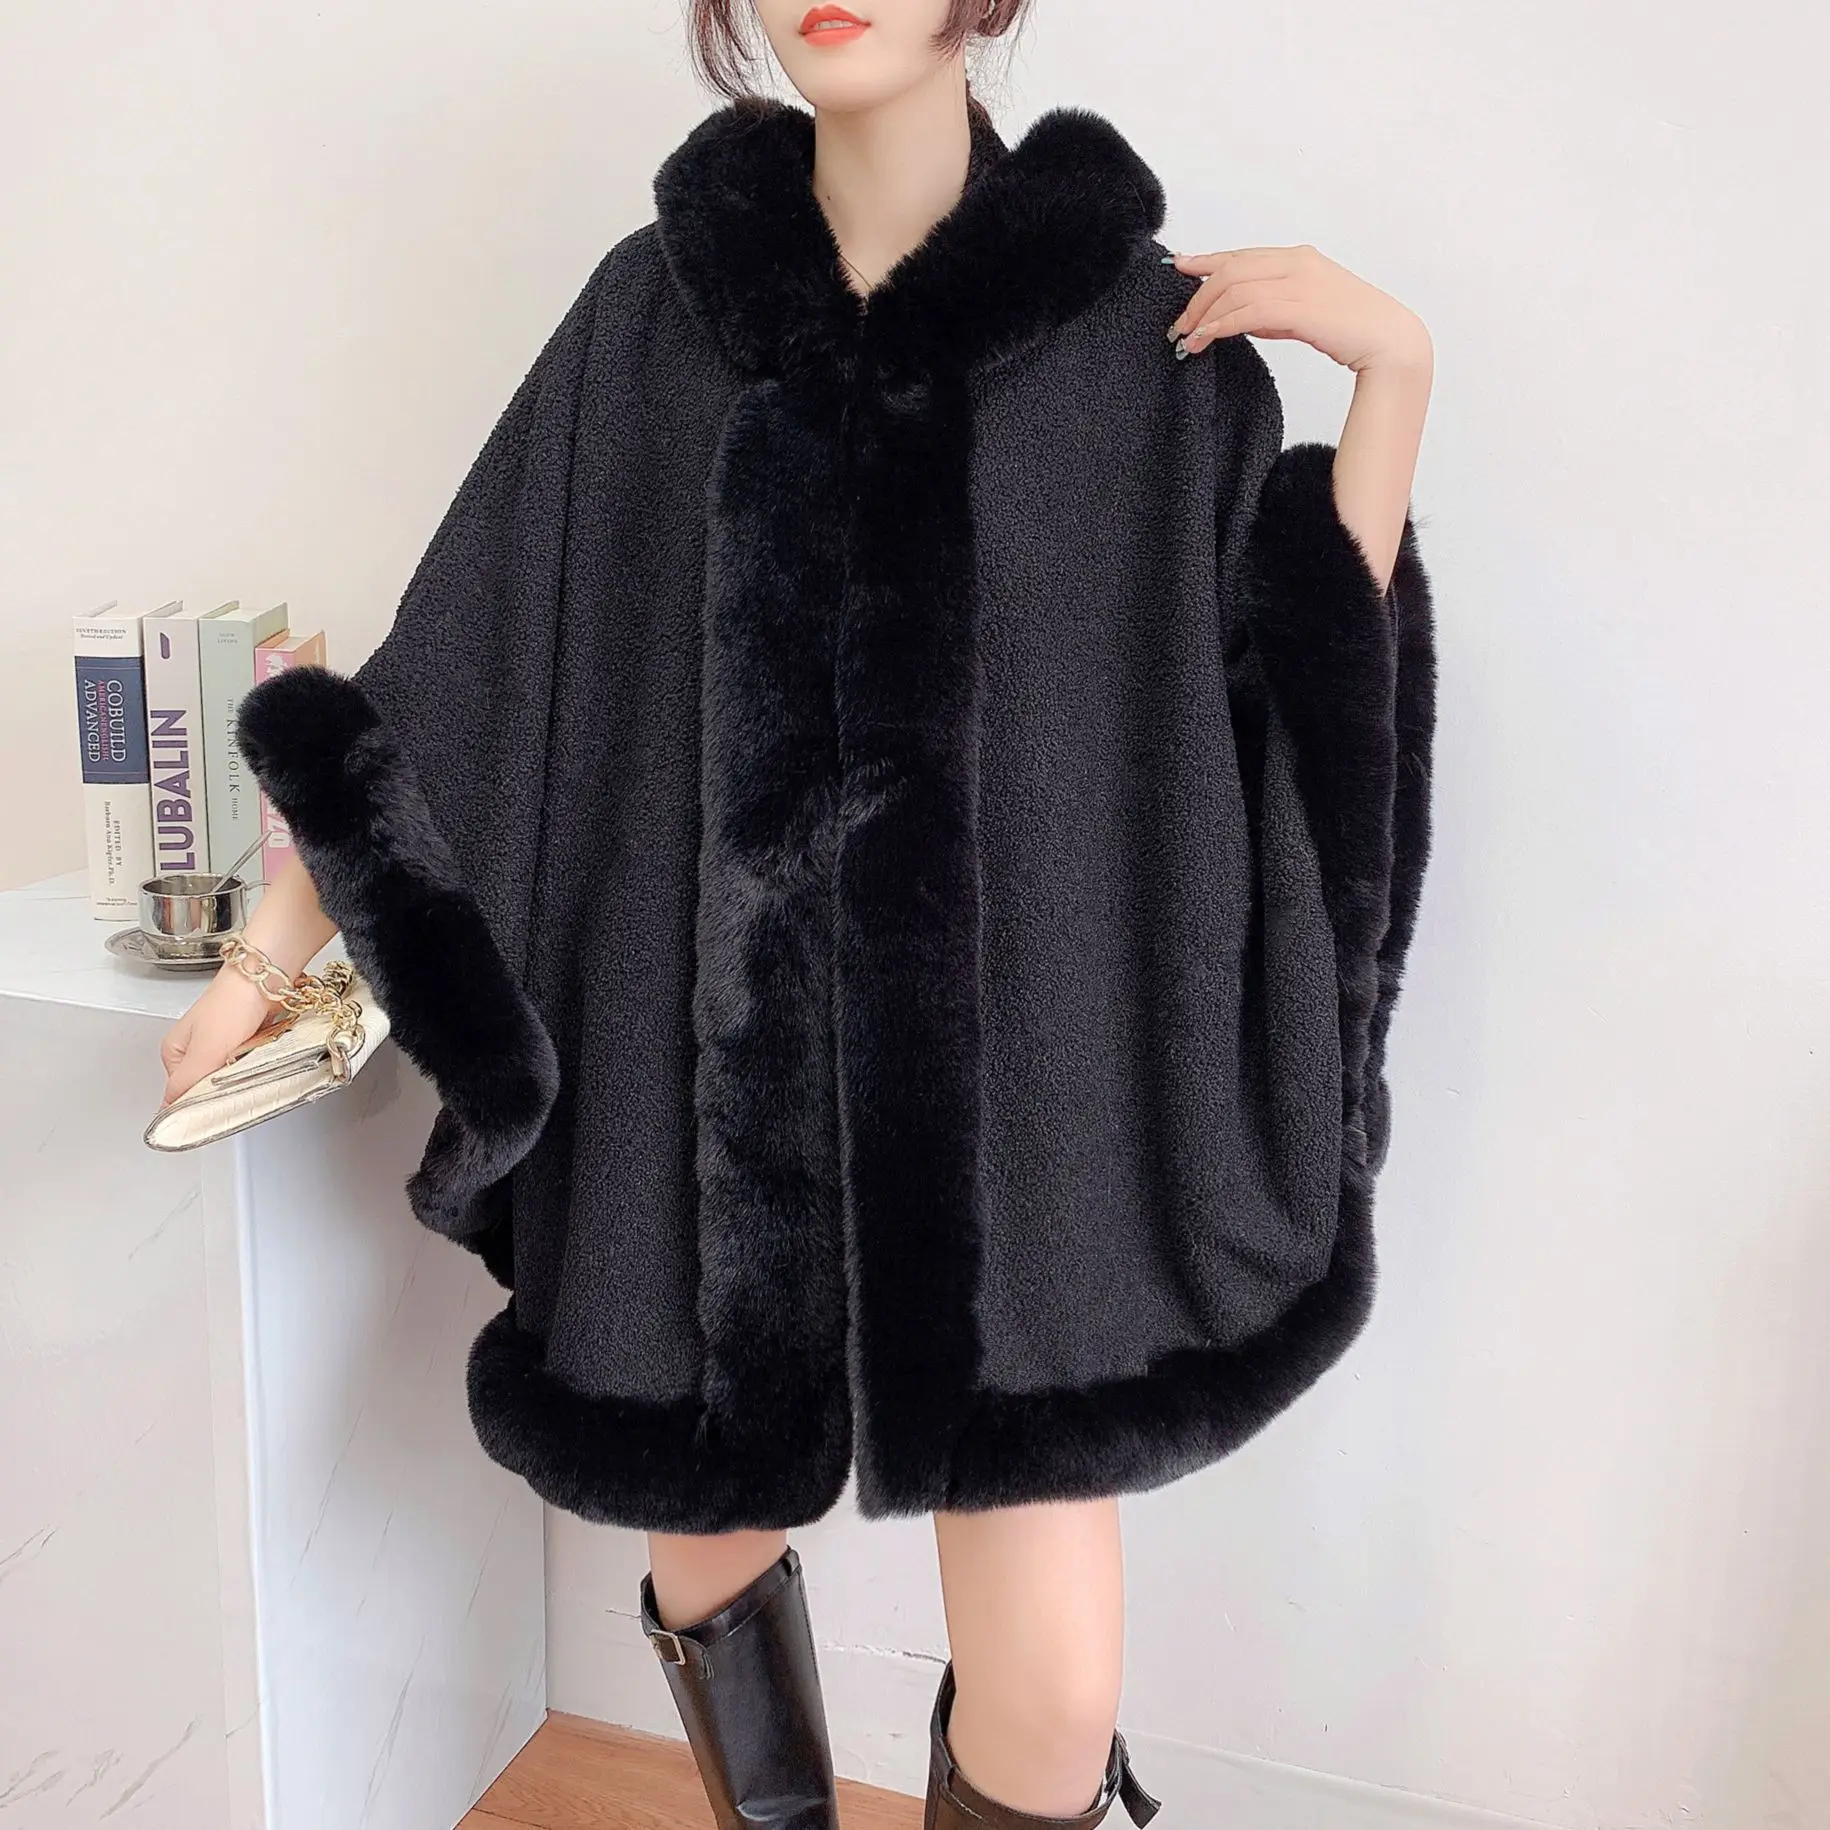 Winter Thick Warm Shawl Party Outer Wear Cloak With Hat Women Long Faux Rabbit Fur Big Collar Granular Velvet Loose Capes Coat woman lace shawl wedding church lace trim scarf soft lightweight scarf with hoodie for hot weather sunproof supplies